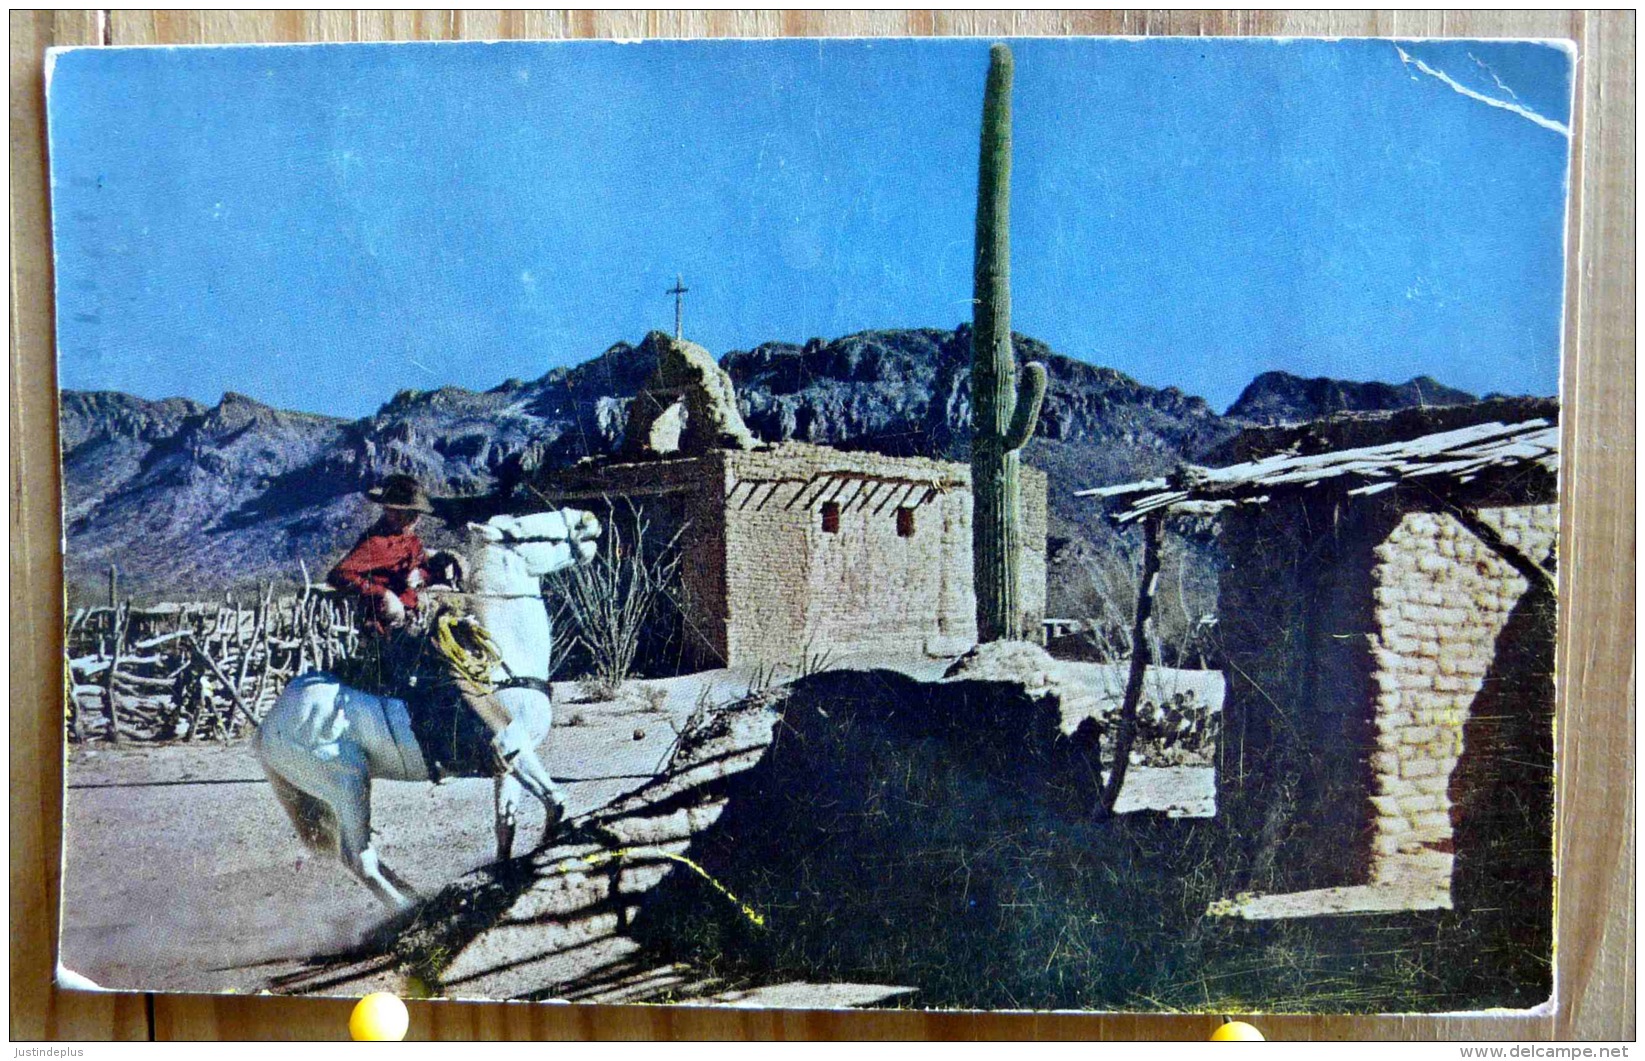 OLD TUCSON AS IT LOOKED IN THE YEAR 1859 FOR THE FILMING OF THE MOVIE ARIZONA SCAN R/V - Tucson